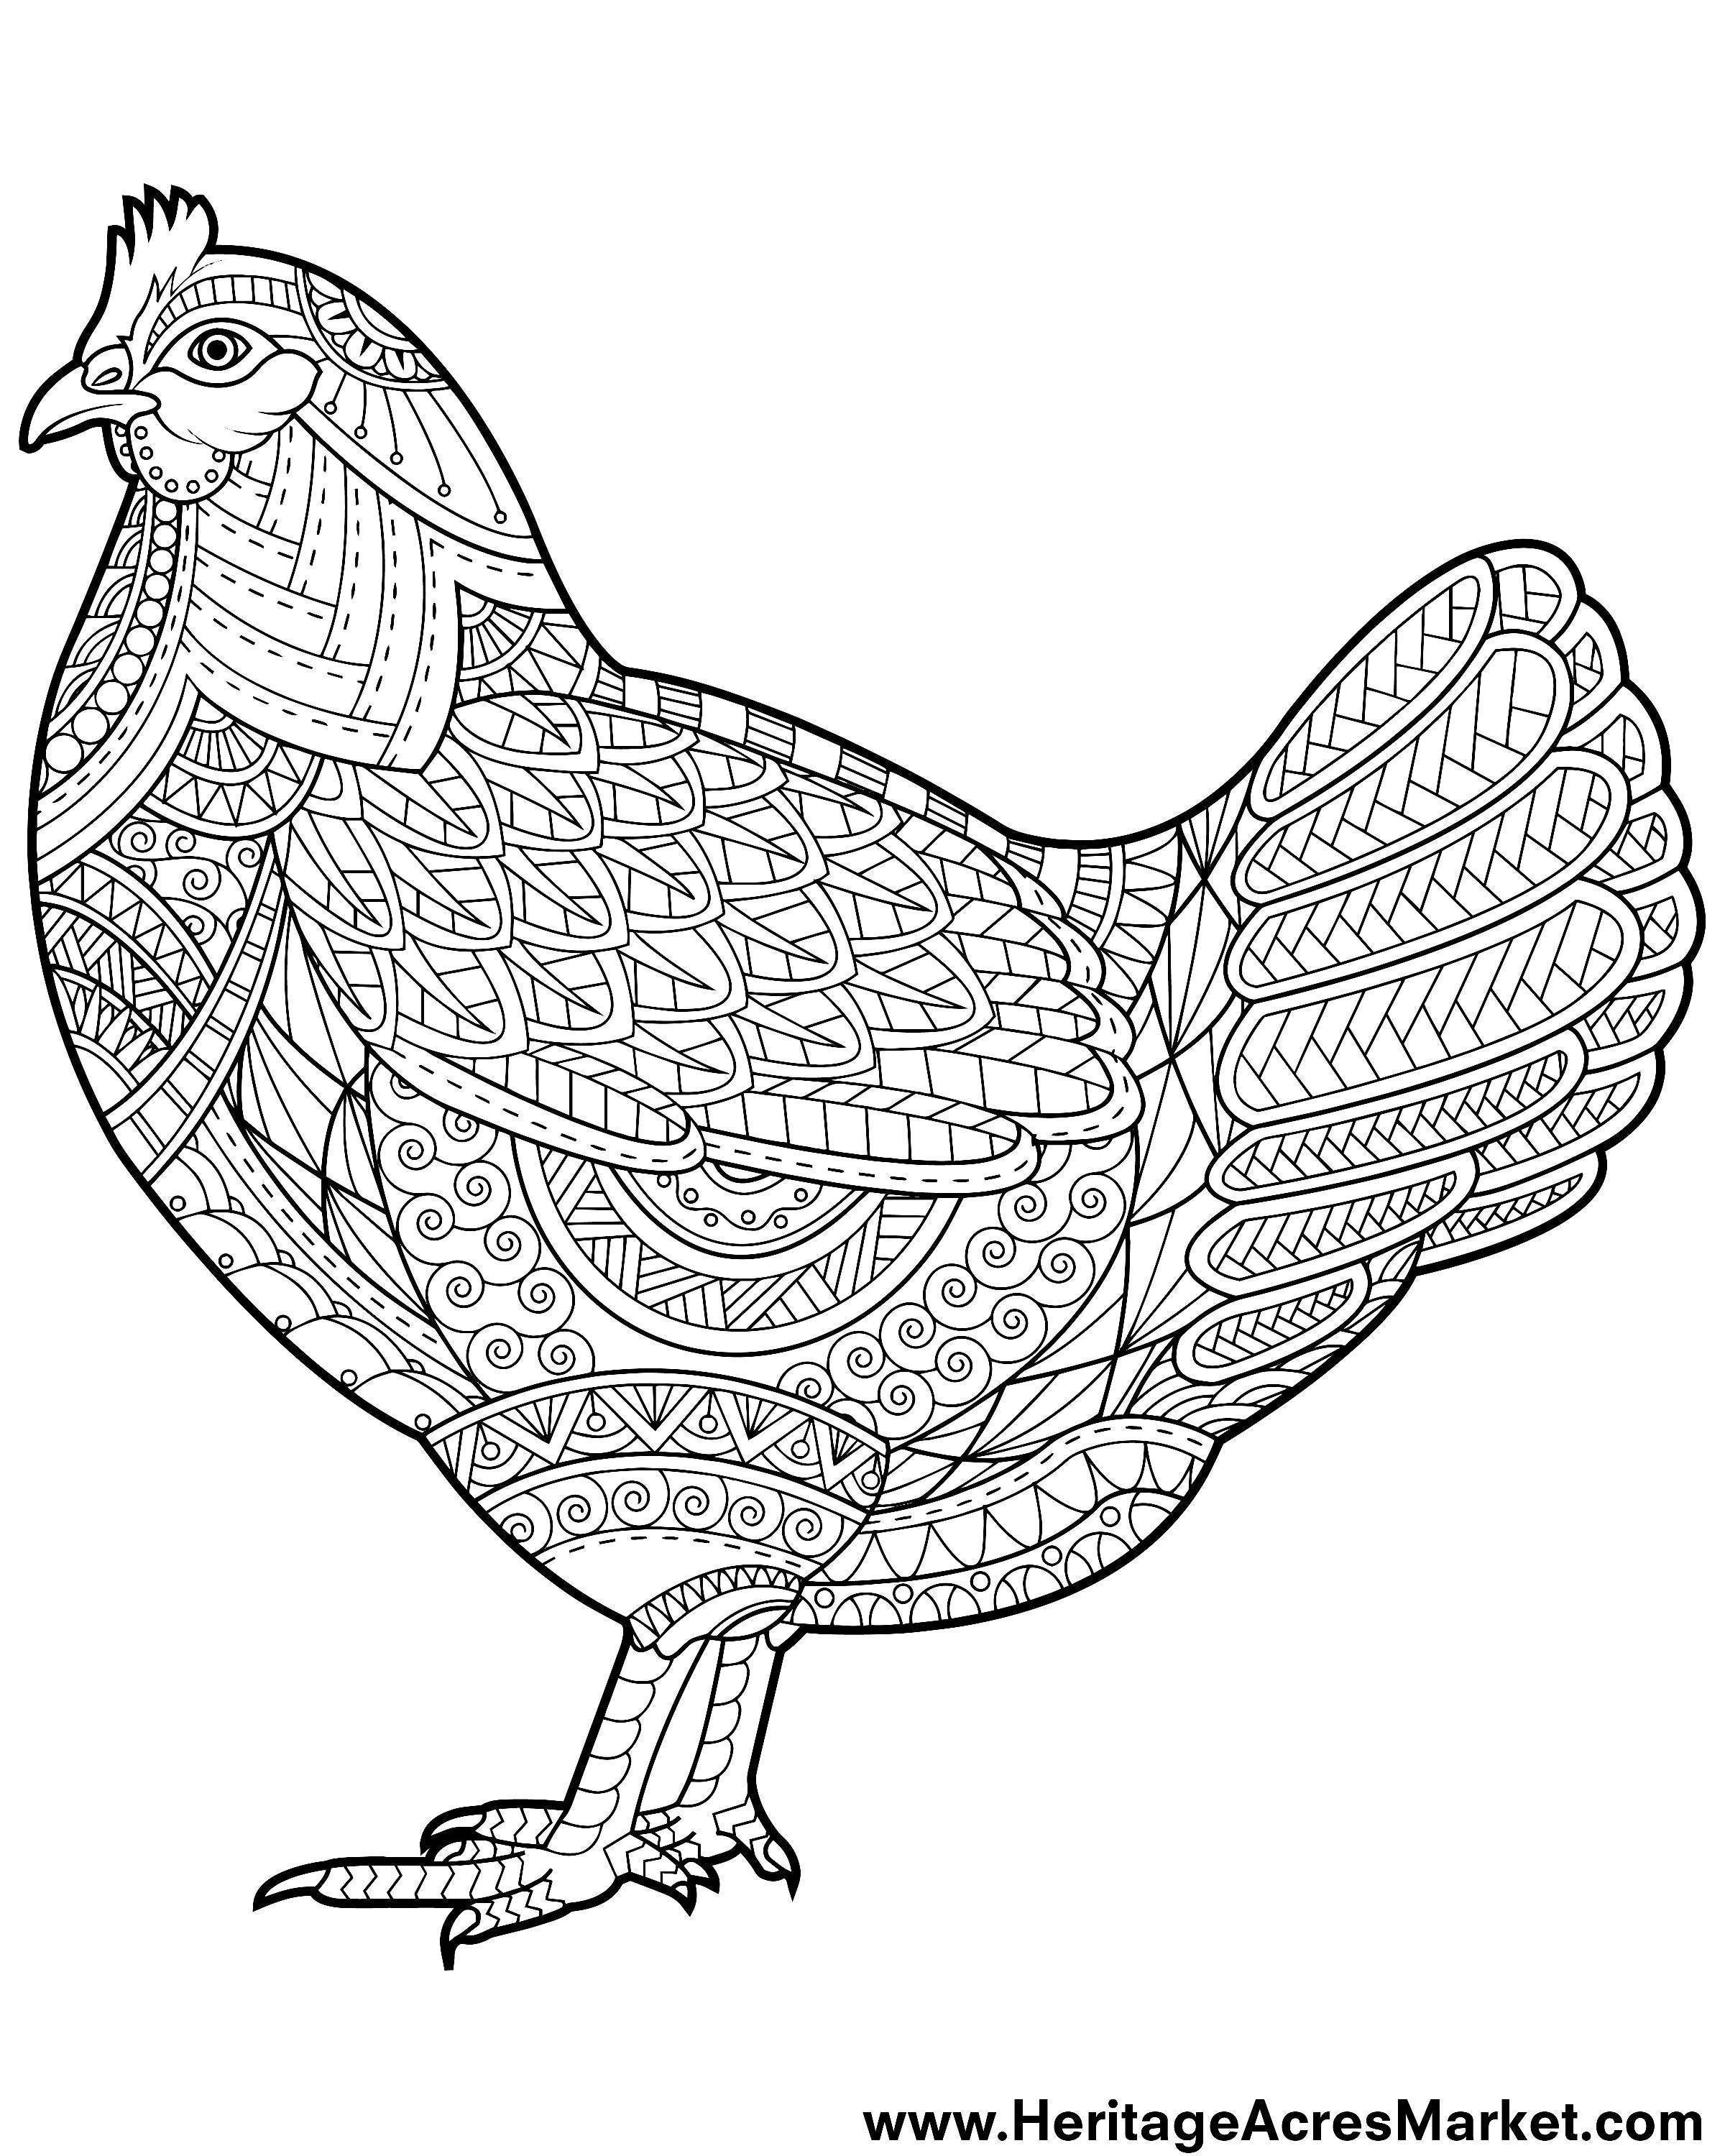 Chickens Coloring Pages
 Funky Chicken Coloring Page Heritage Acres Market LLC